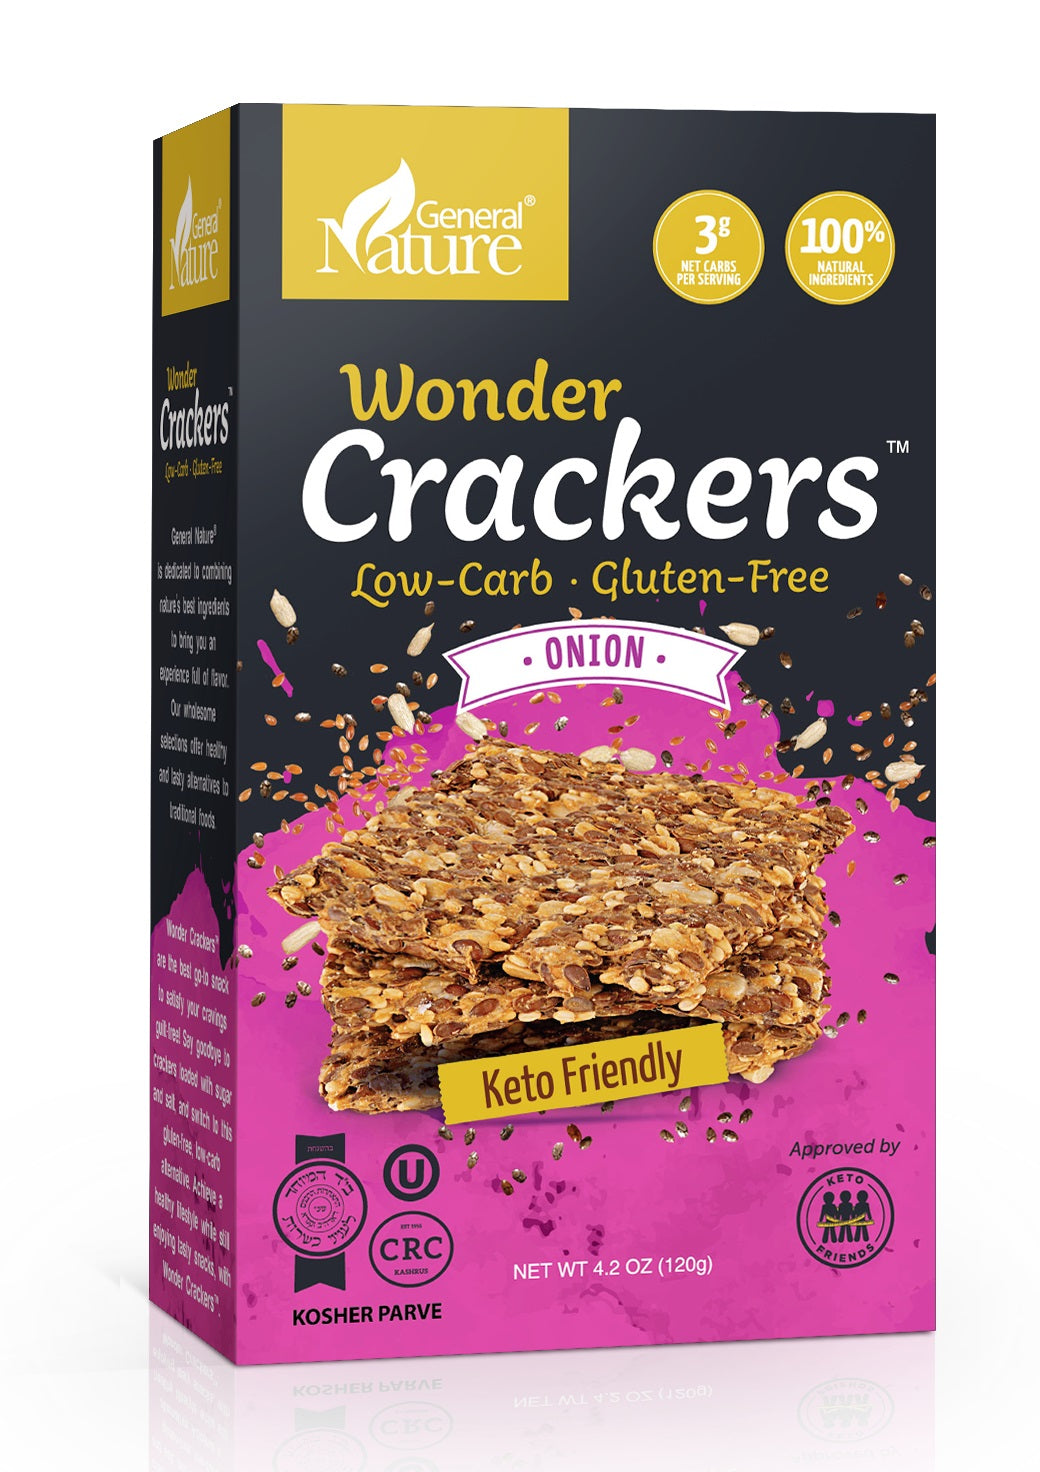 General Nature Low-Carb, Gluten-Free Wonder Crackers, Onion, 4.2oz - Multi-Pack